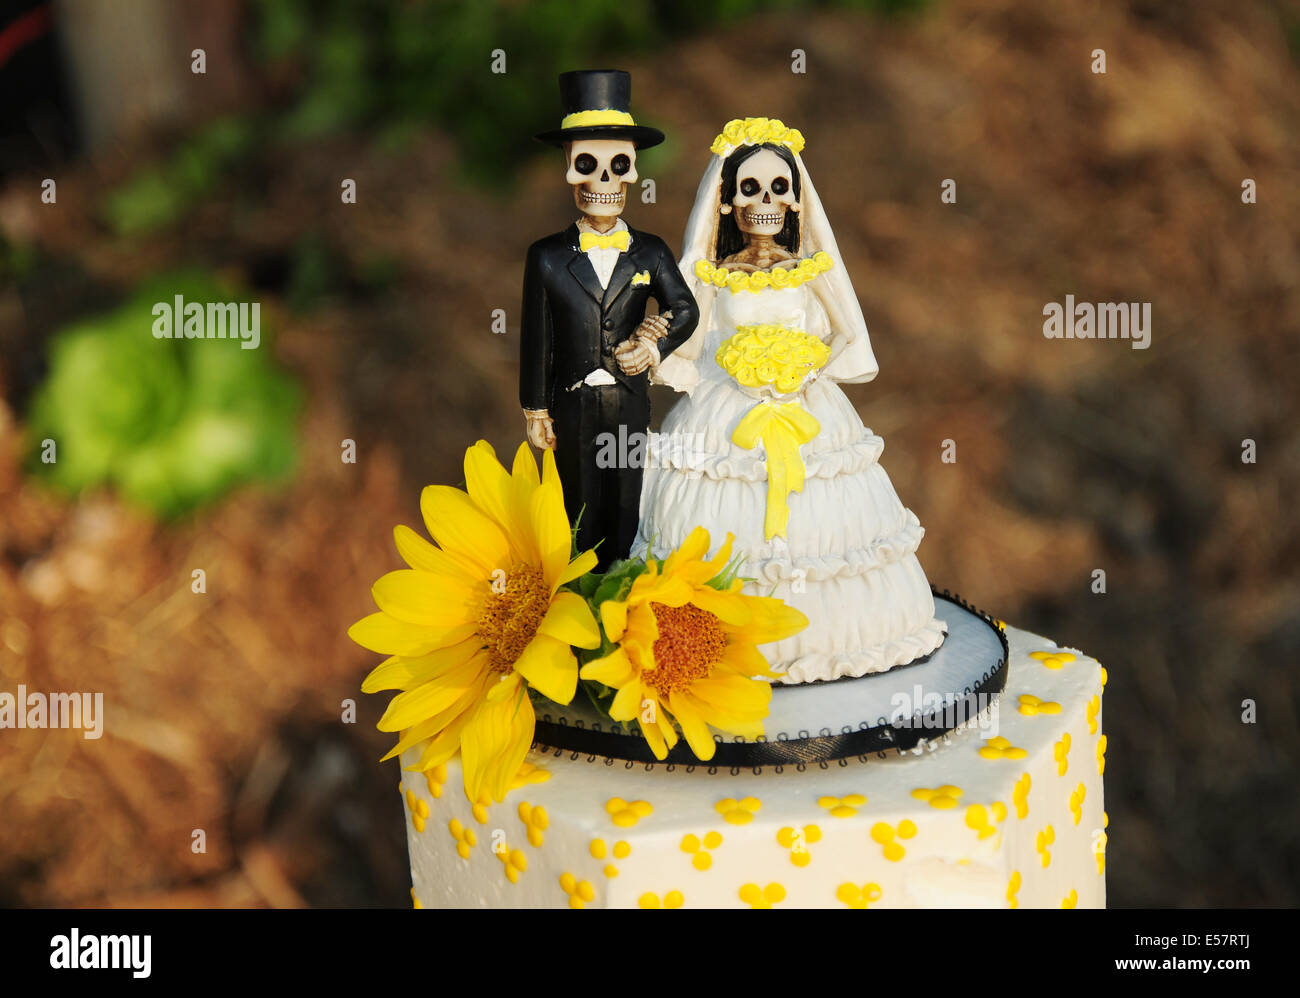 A wedding cake topped with a skeleton bride and groom, showing some fun trendy wedding day alternatives Stock Photo